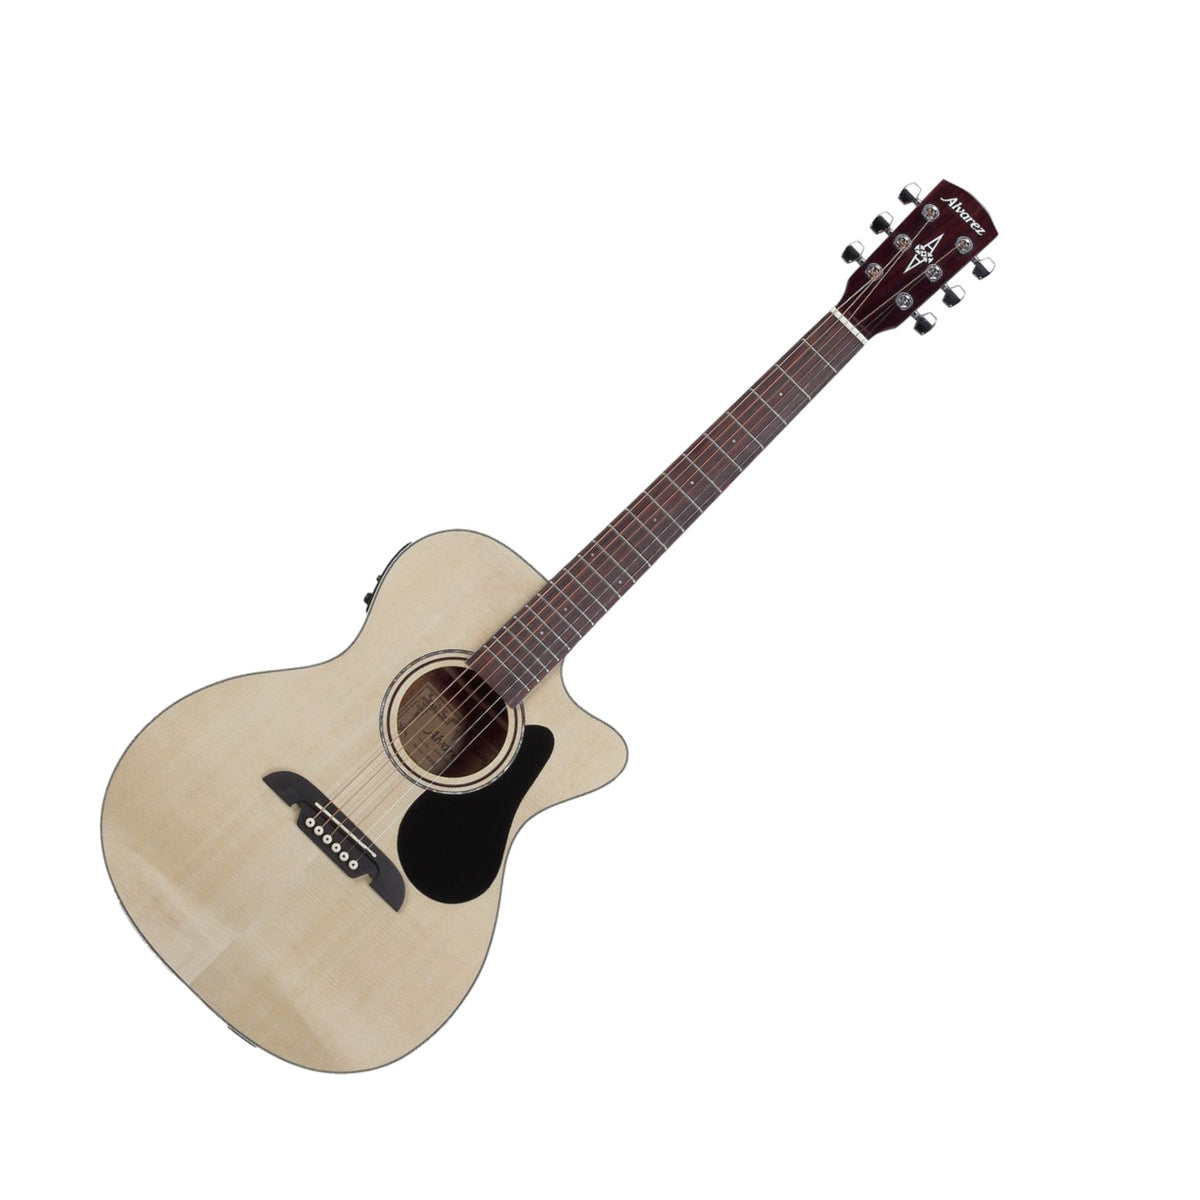 The Alvarez Regent Series is a high quality entry-level guitar line designed to provide value instruments with many features and specifications you’ll find in pro-level Alvarez models.